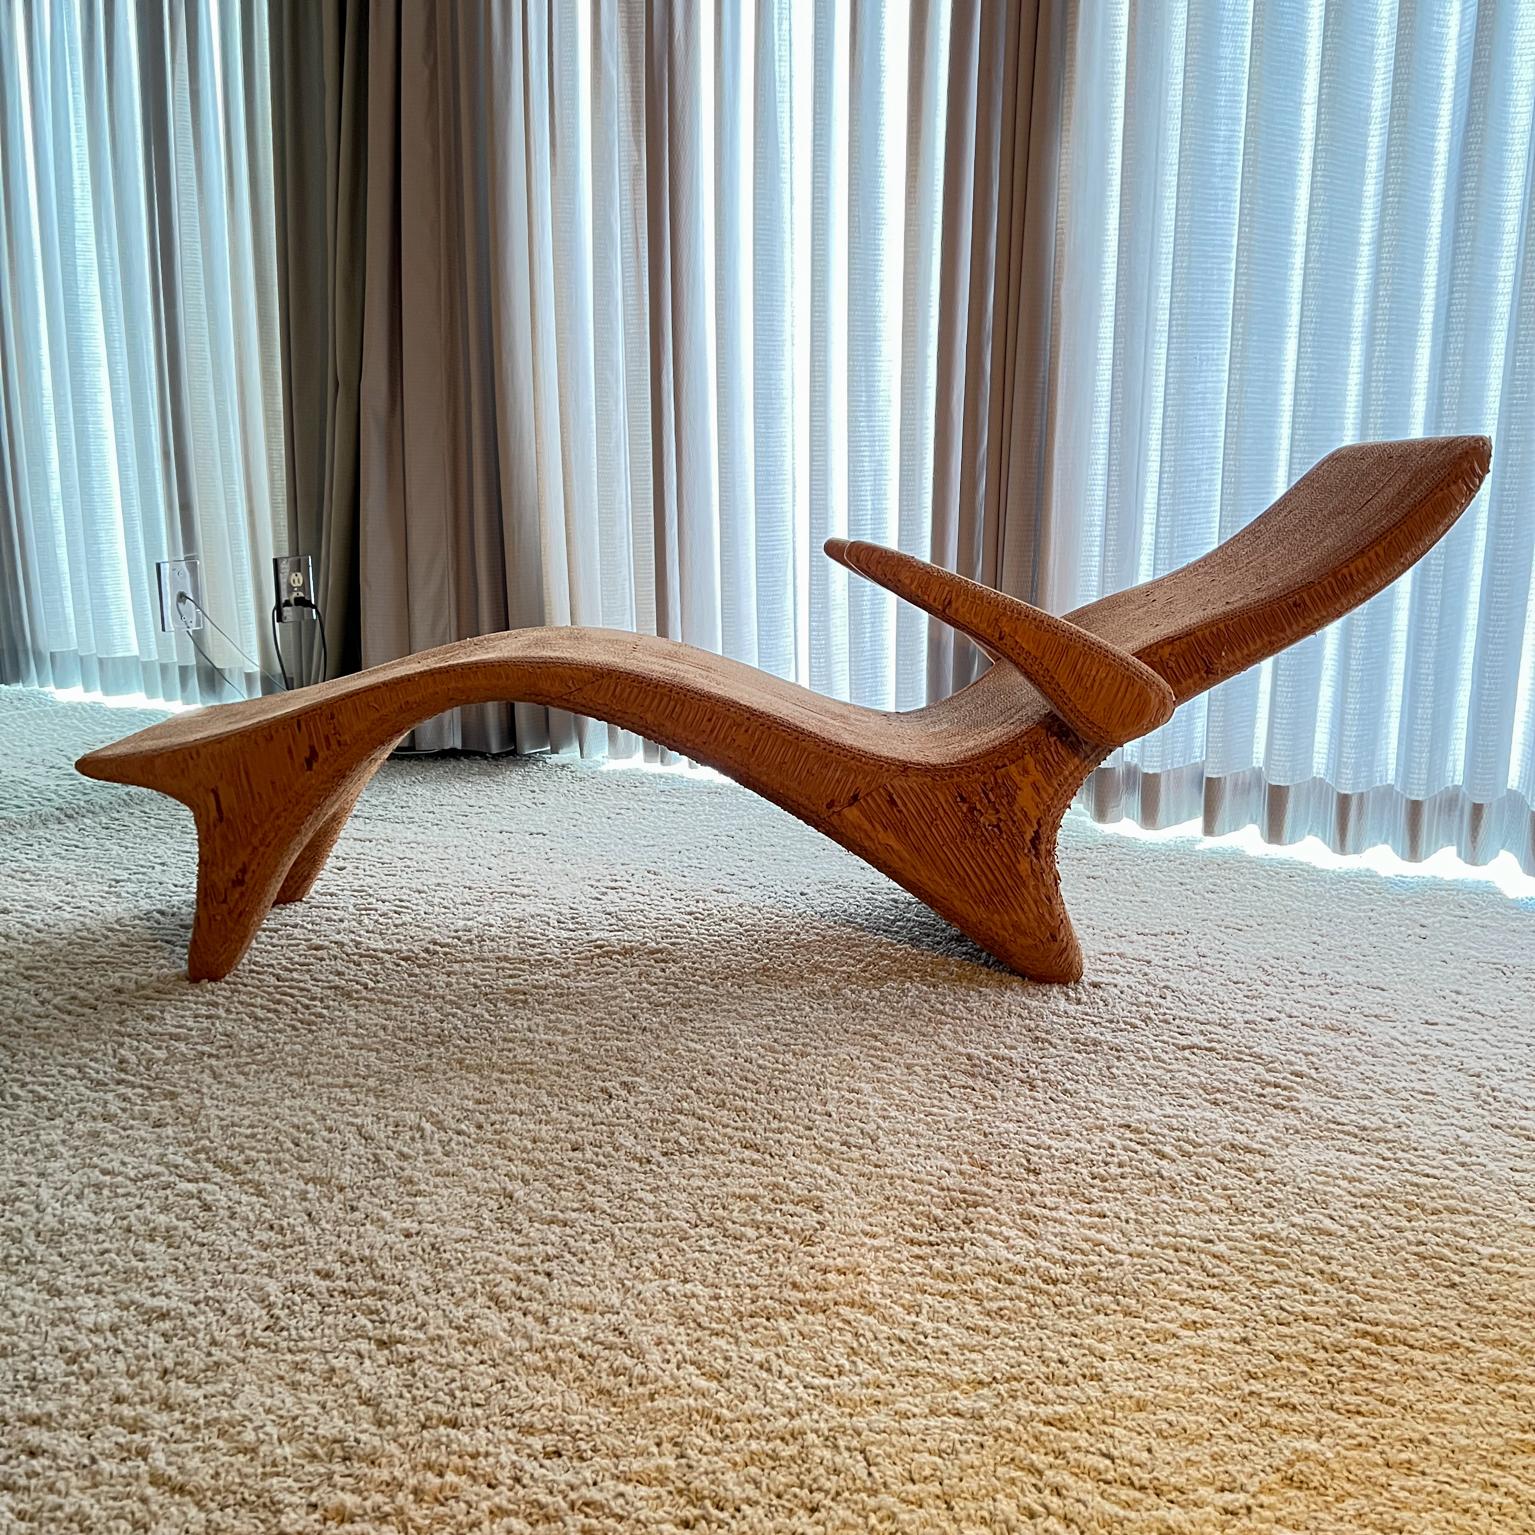  1970s Chaise Lounge LA Art Chair Style of Frank Gehry  For Sale 2